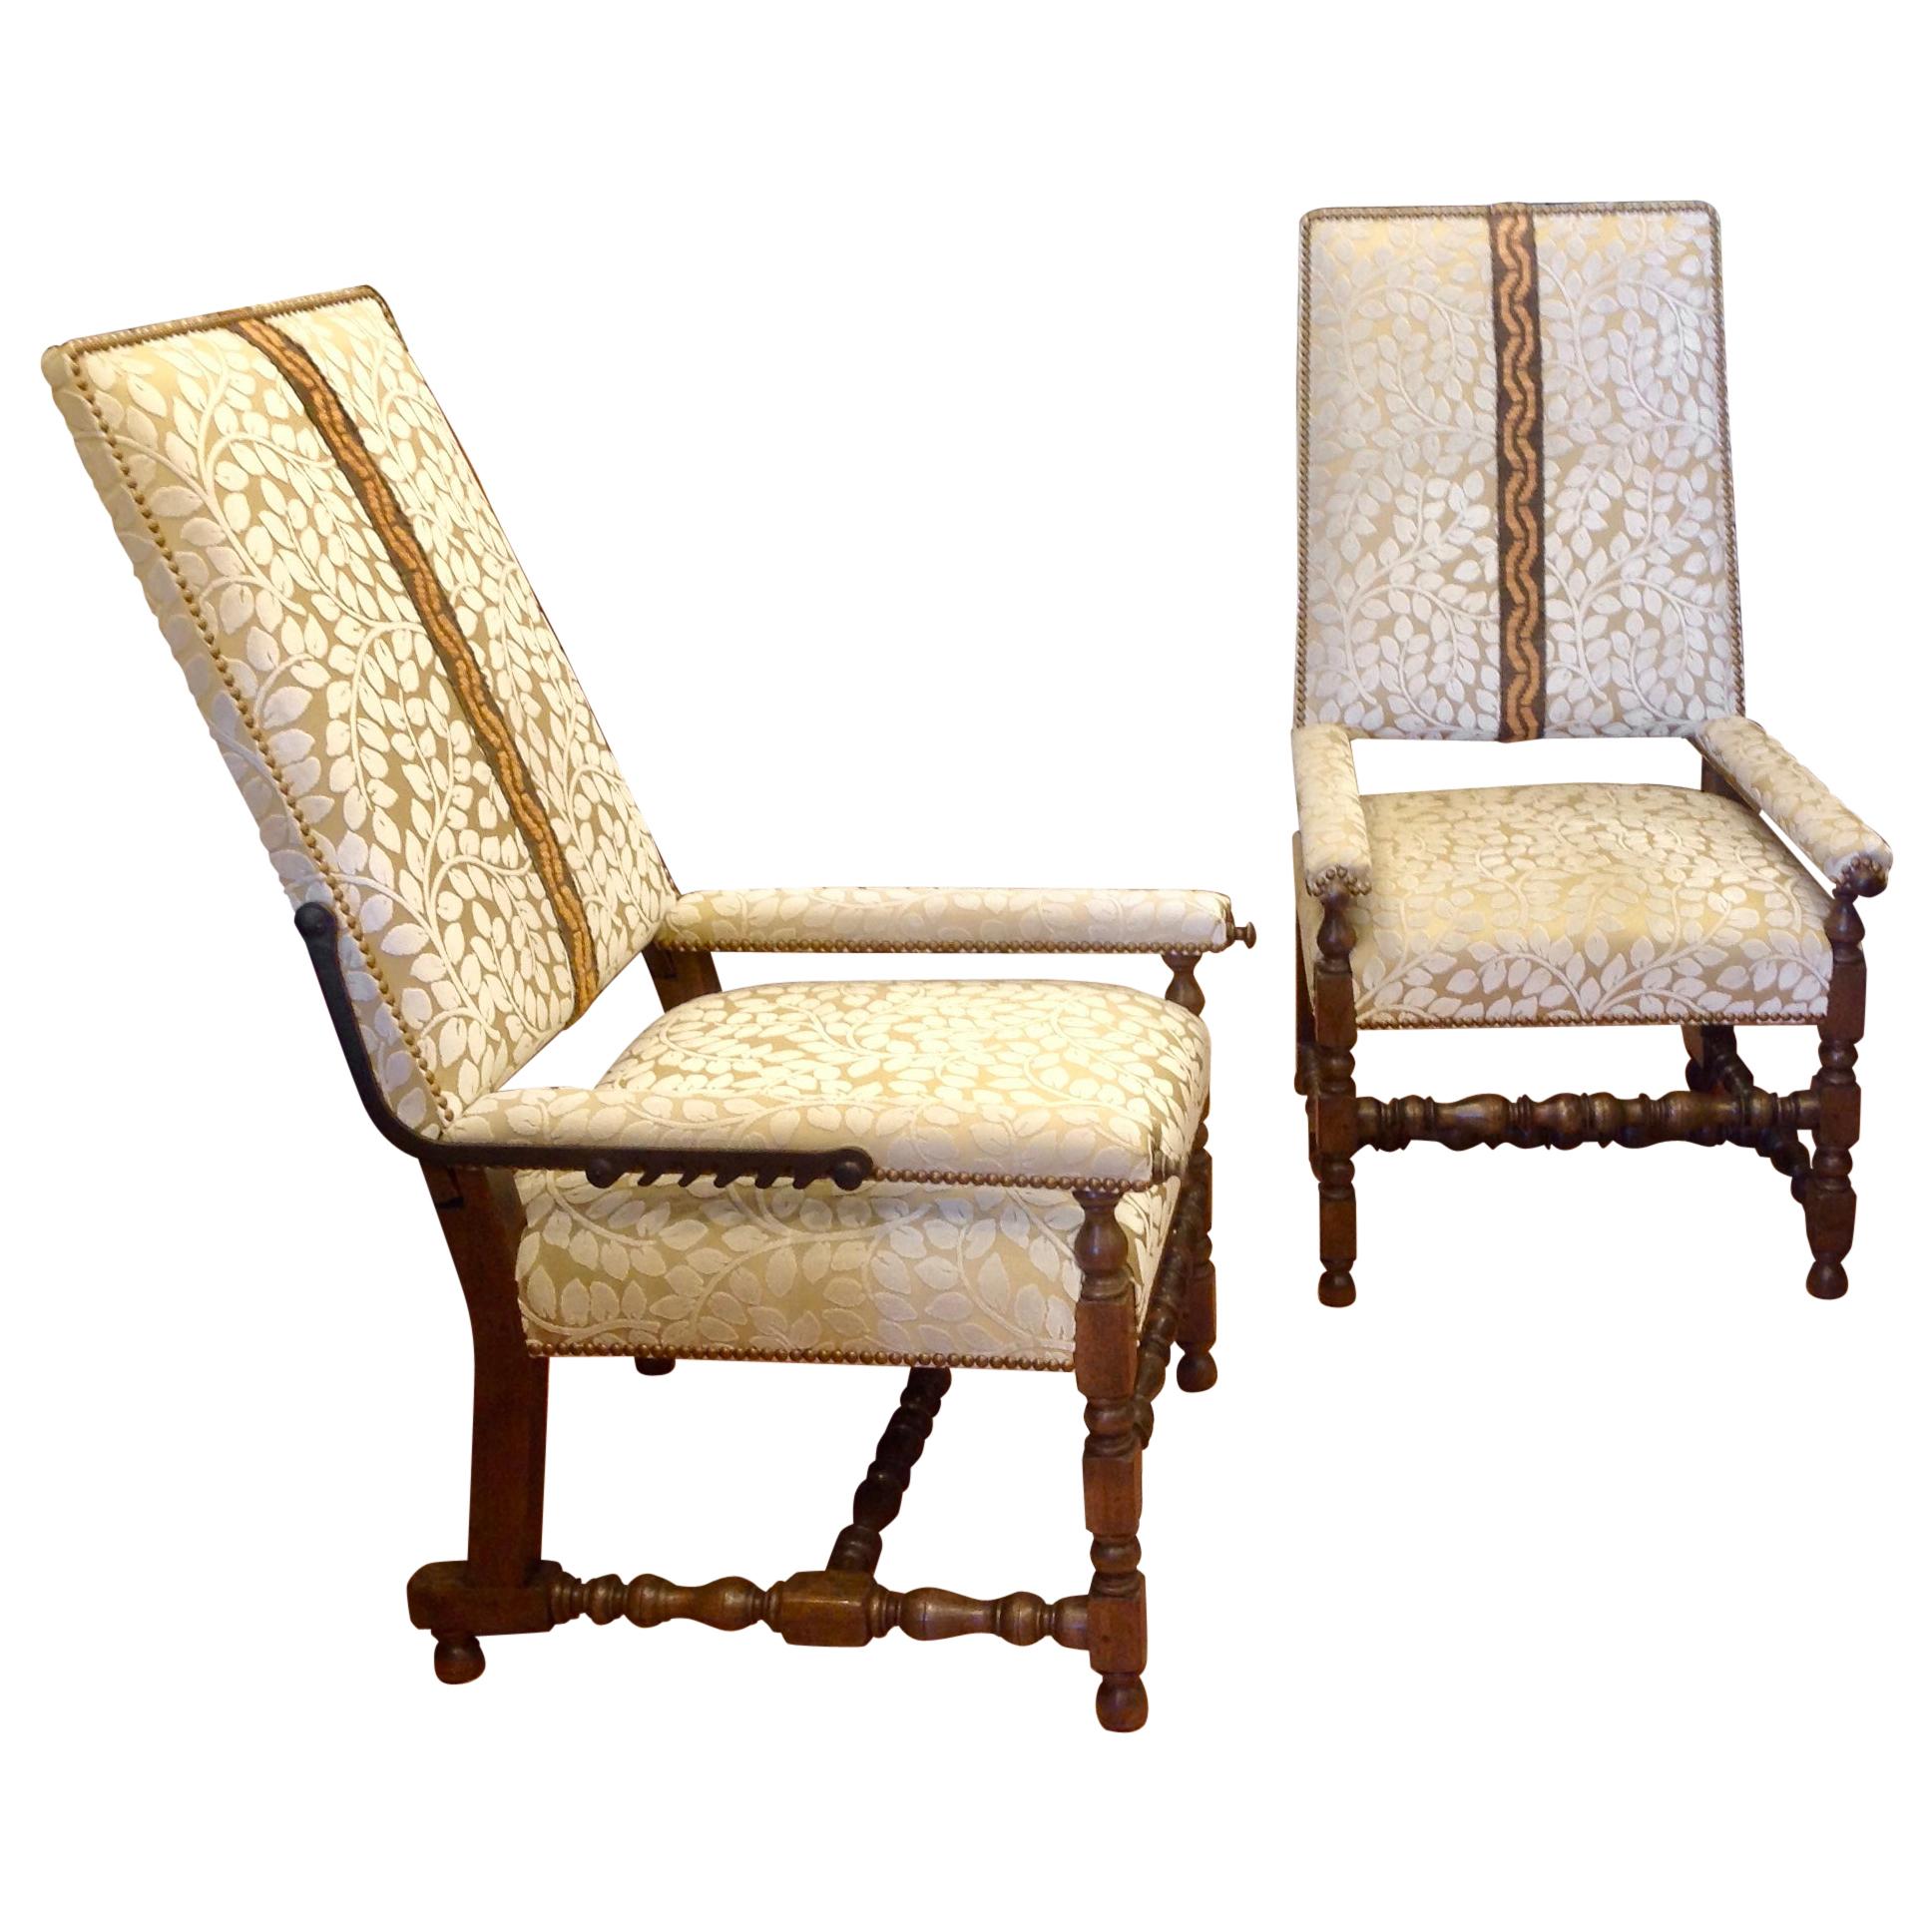 Pair of Reclining Plantation Chairs